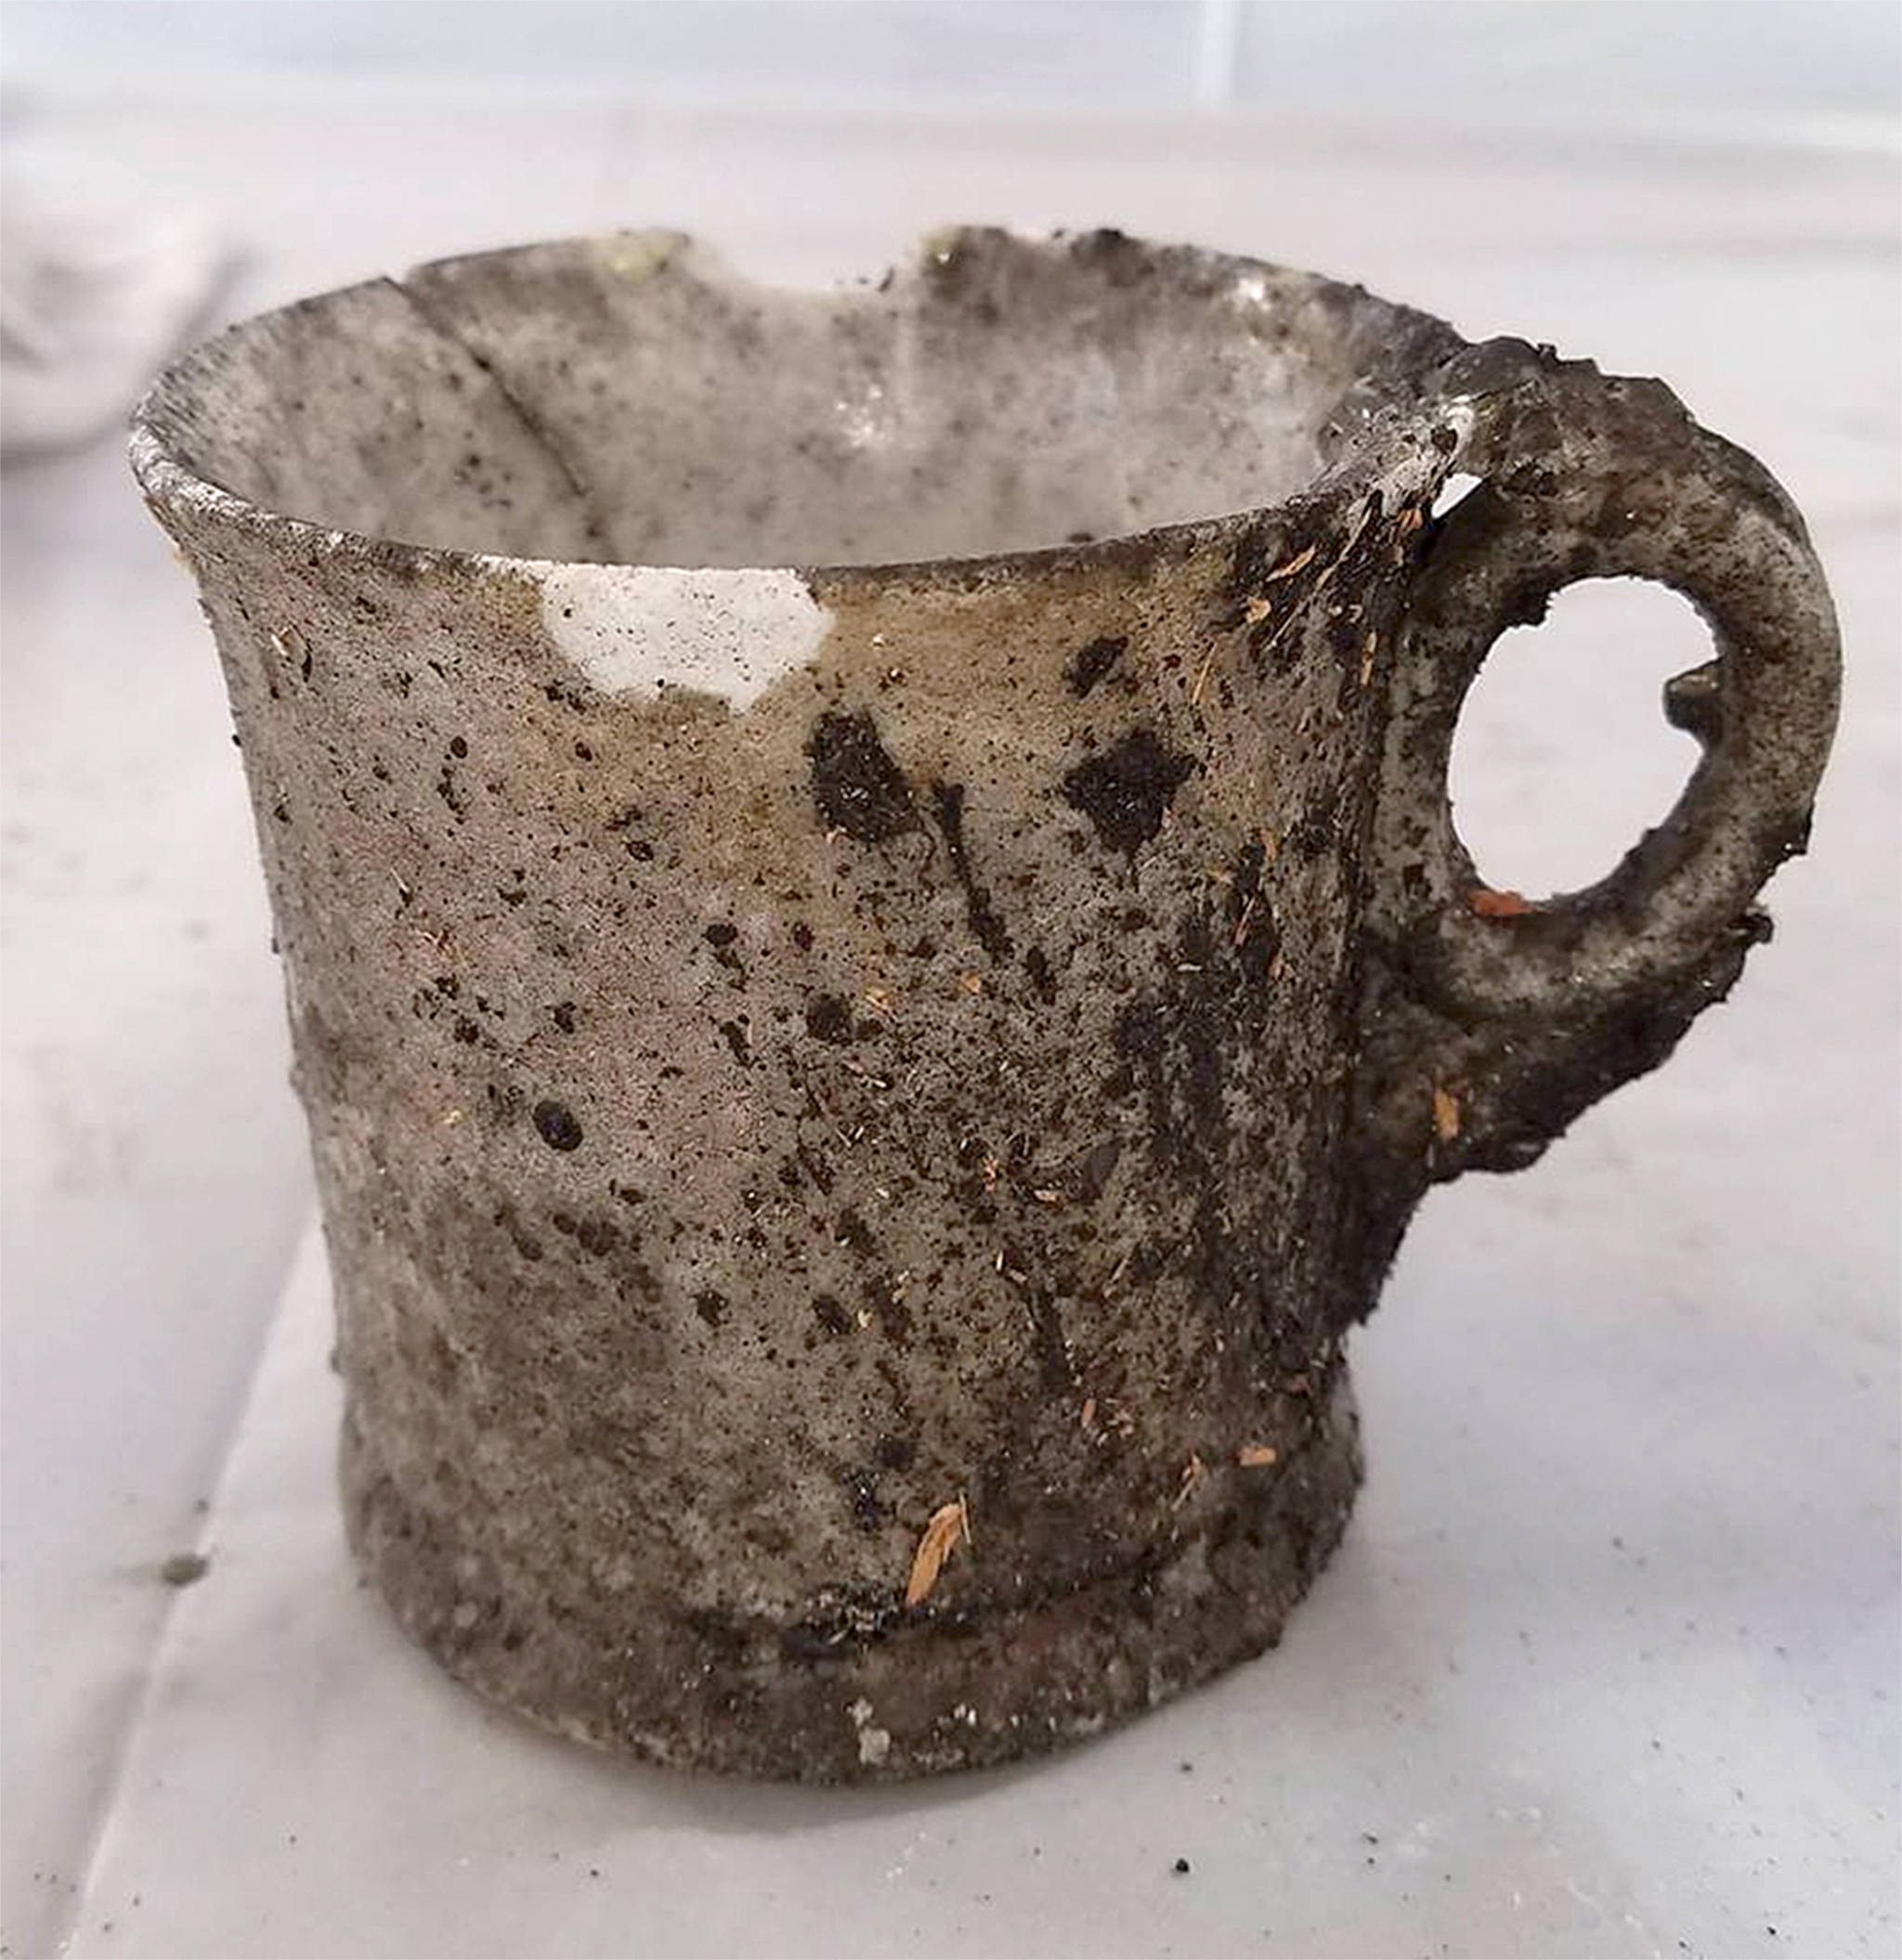 (Aberdeen Museum of History) This cup was recently recovered from the remains of the Aberdeen Museum of History. The cup also survived a major fire in October of 1903, according to the museums Facebook page.